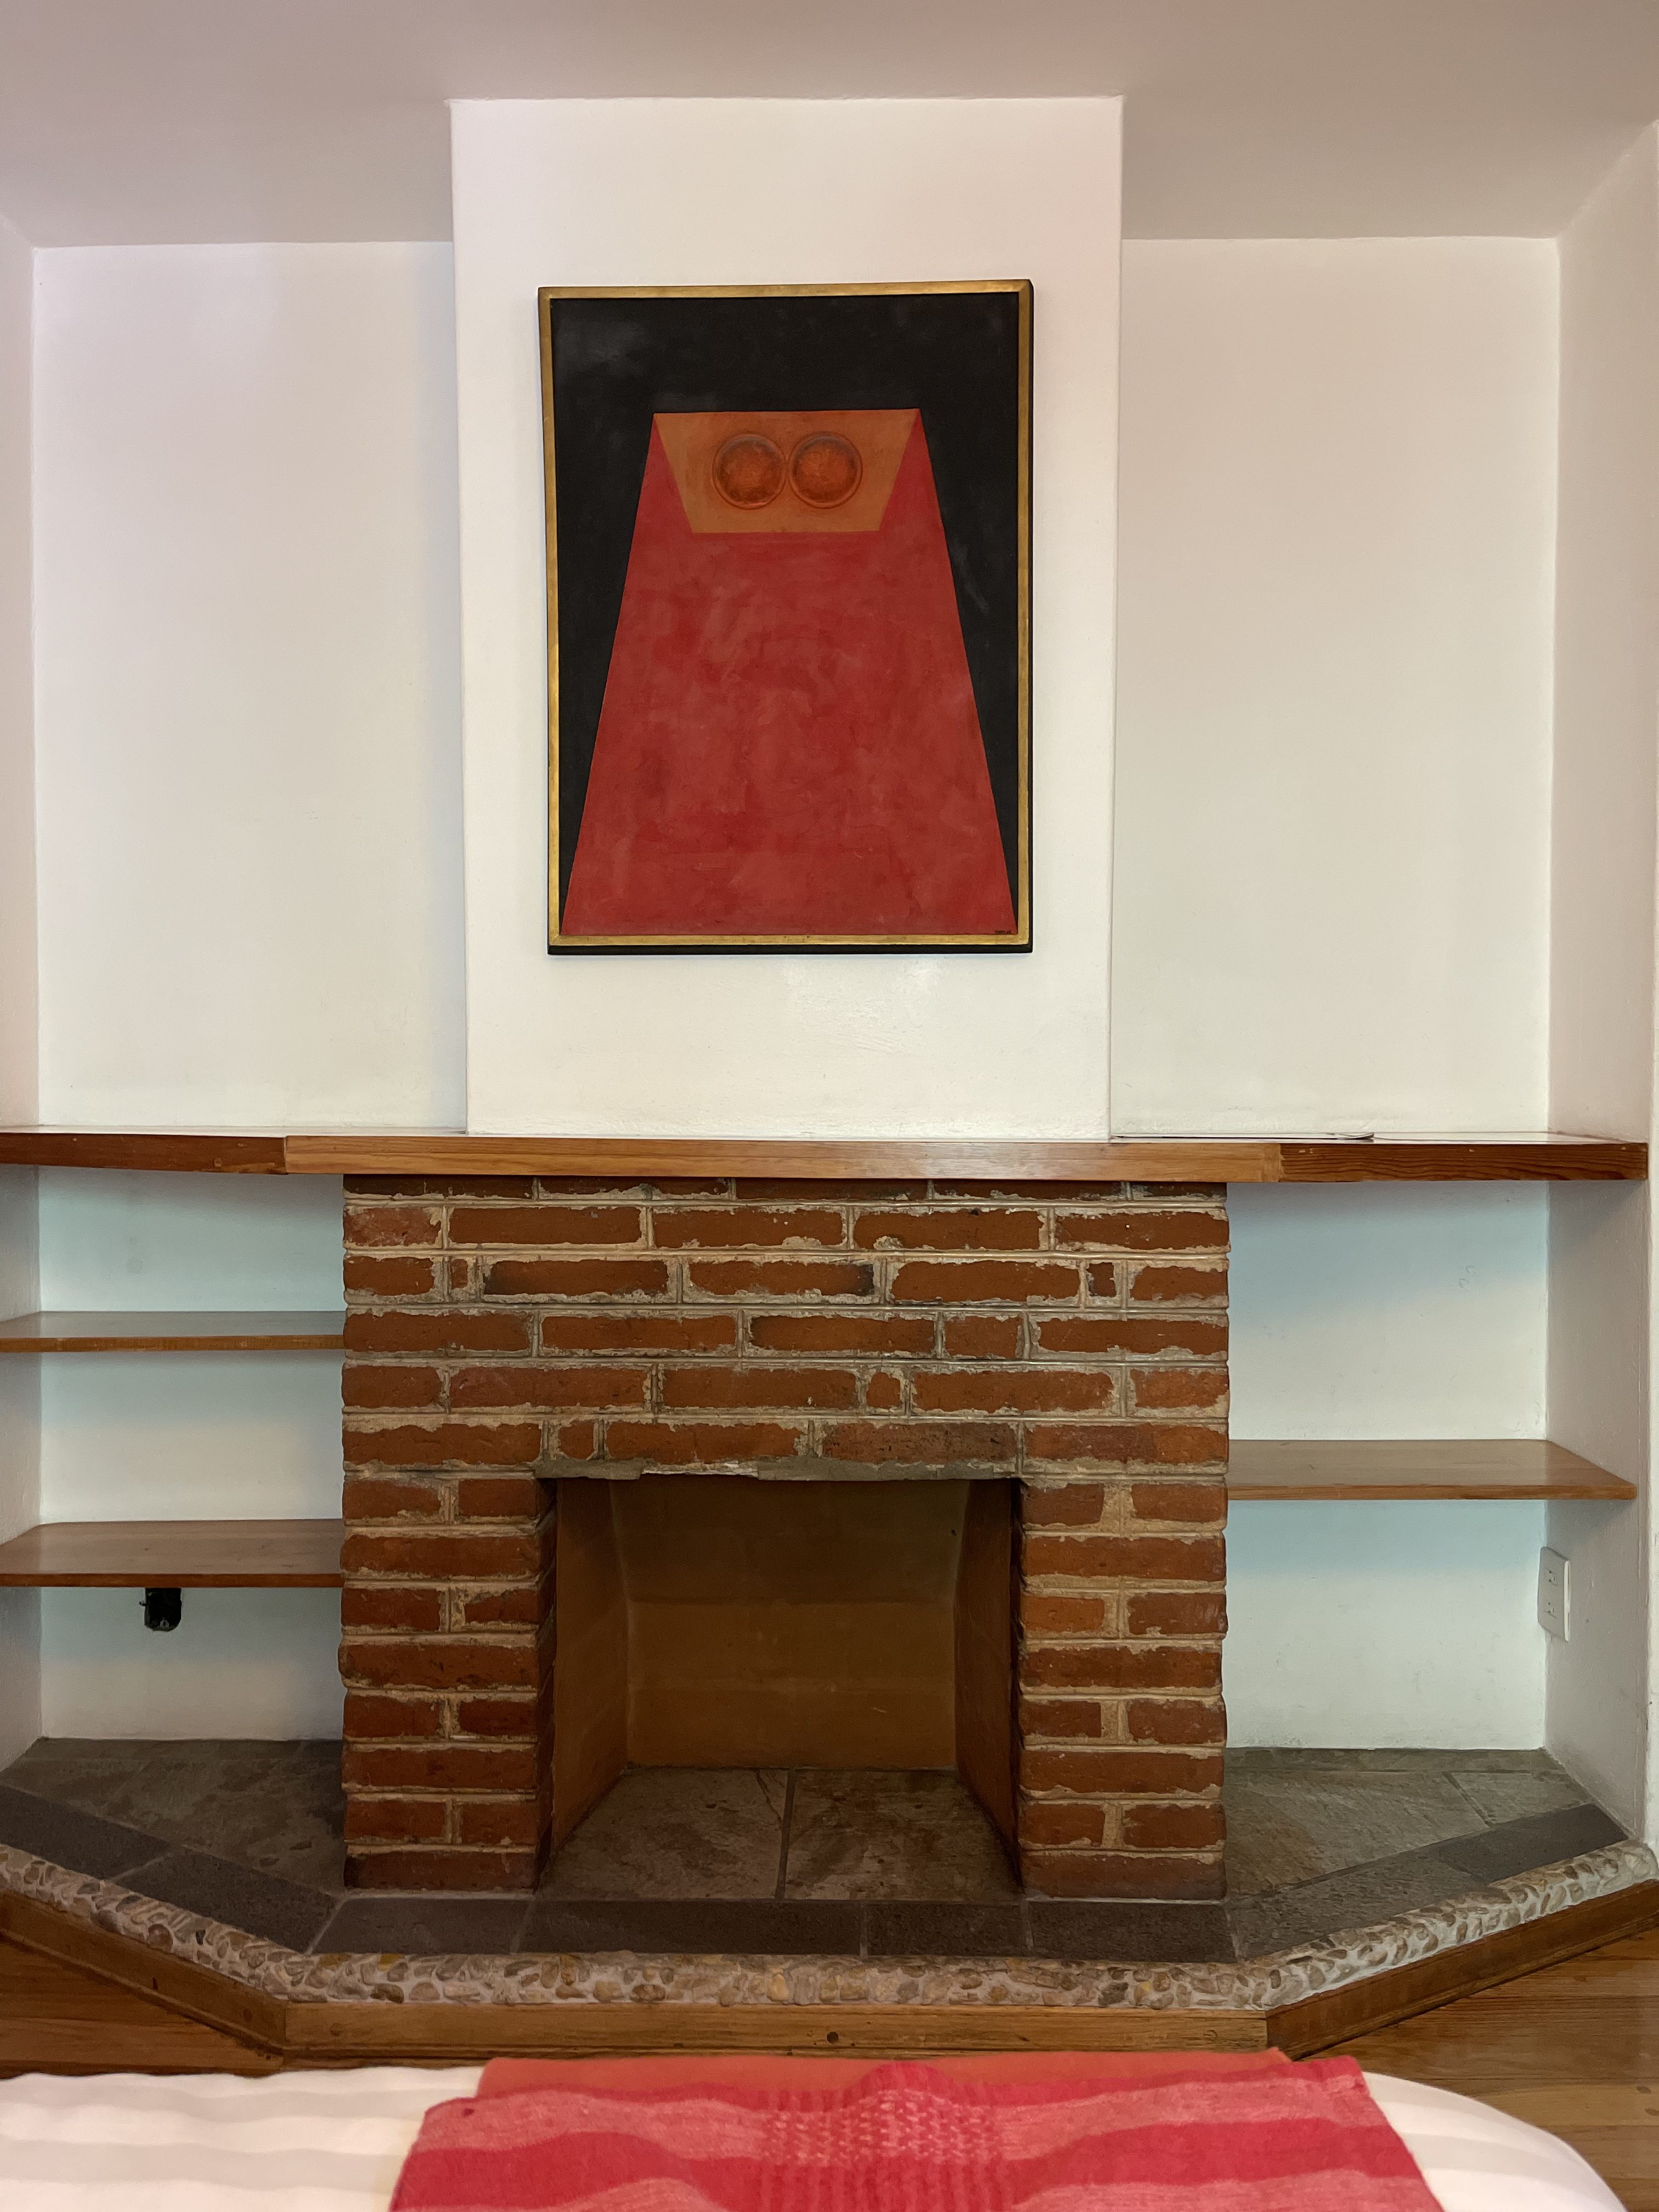 A red painting hangs above a fireplace.